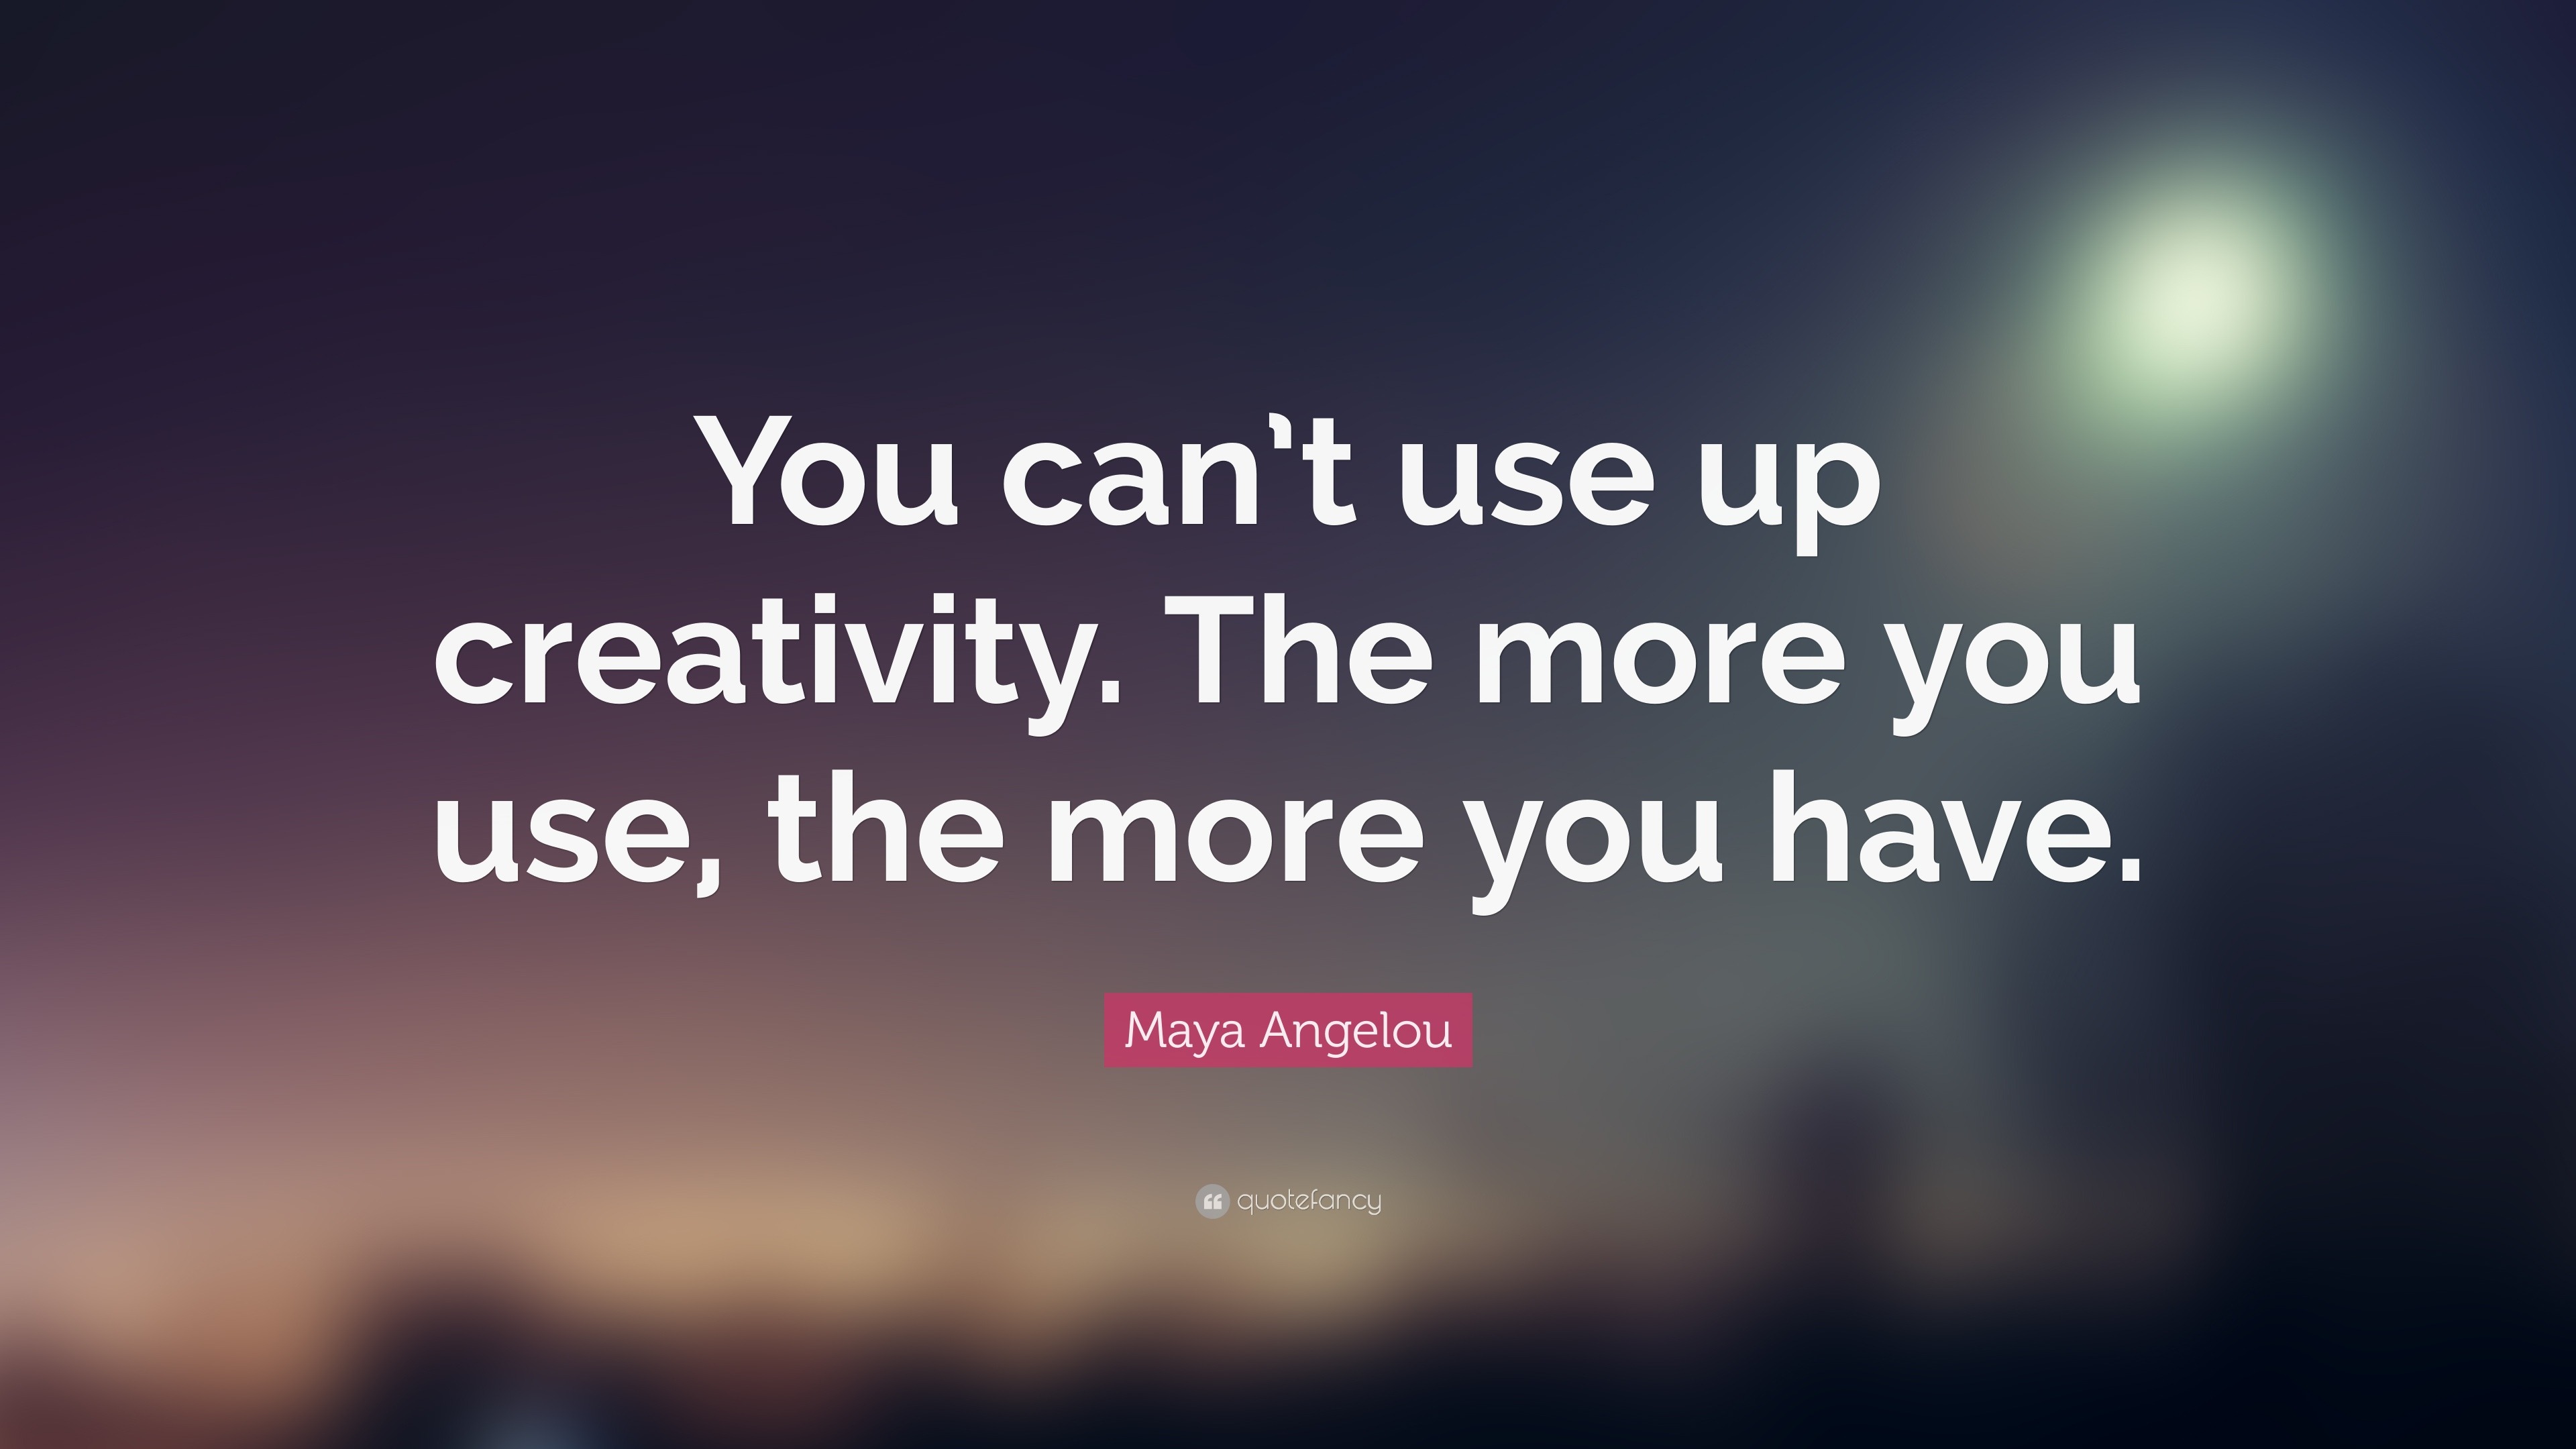 Maya Angelou You Cant Use Up Creativity Motivational Inspiring Poster 12x18 